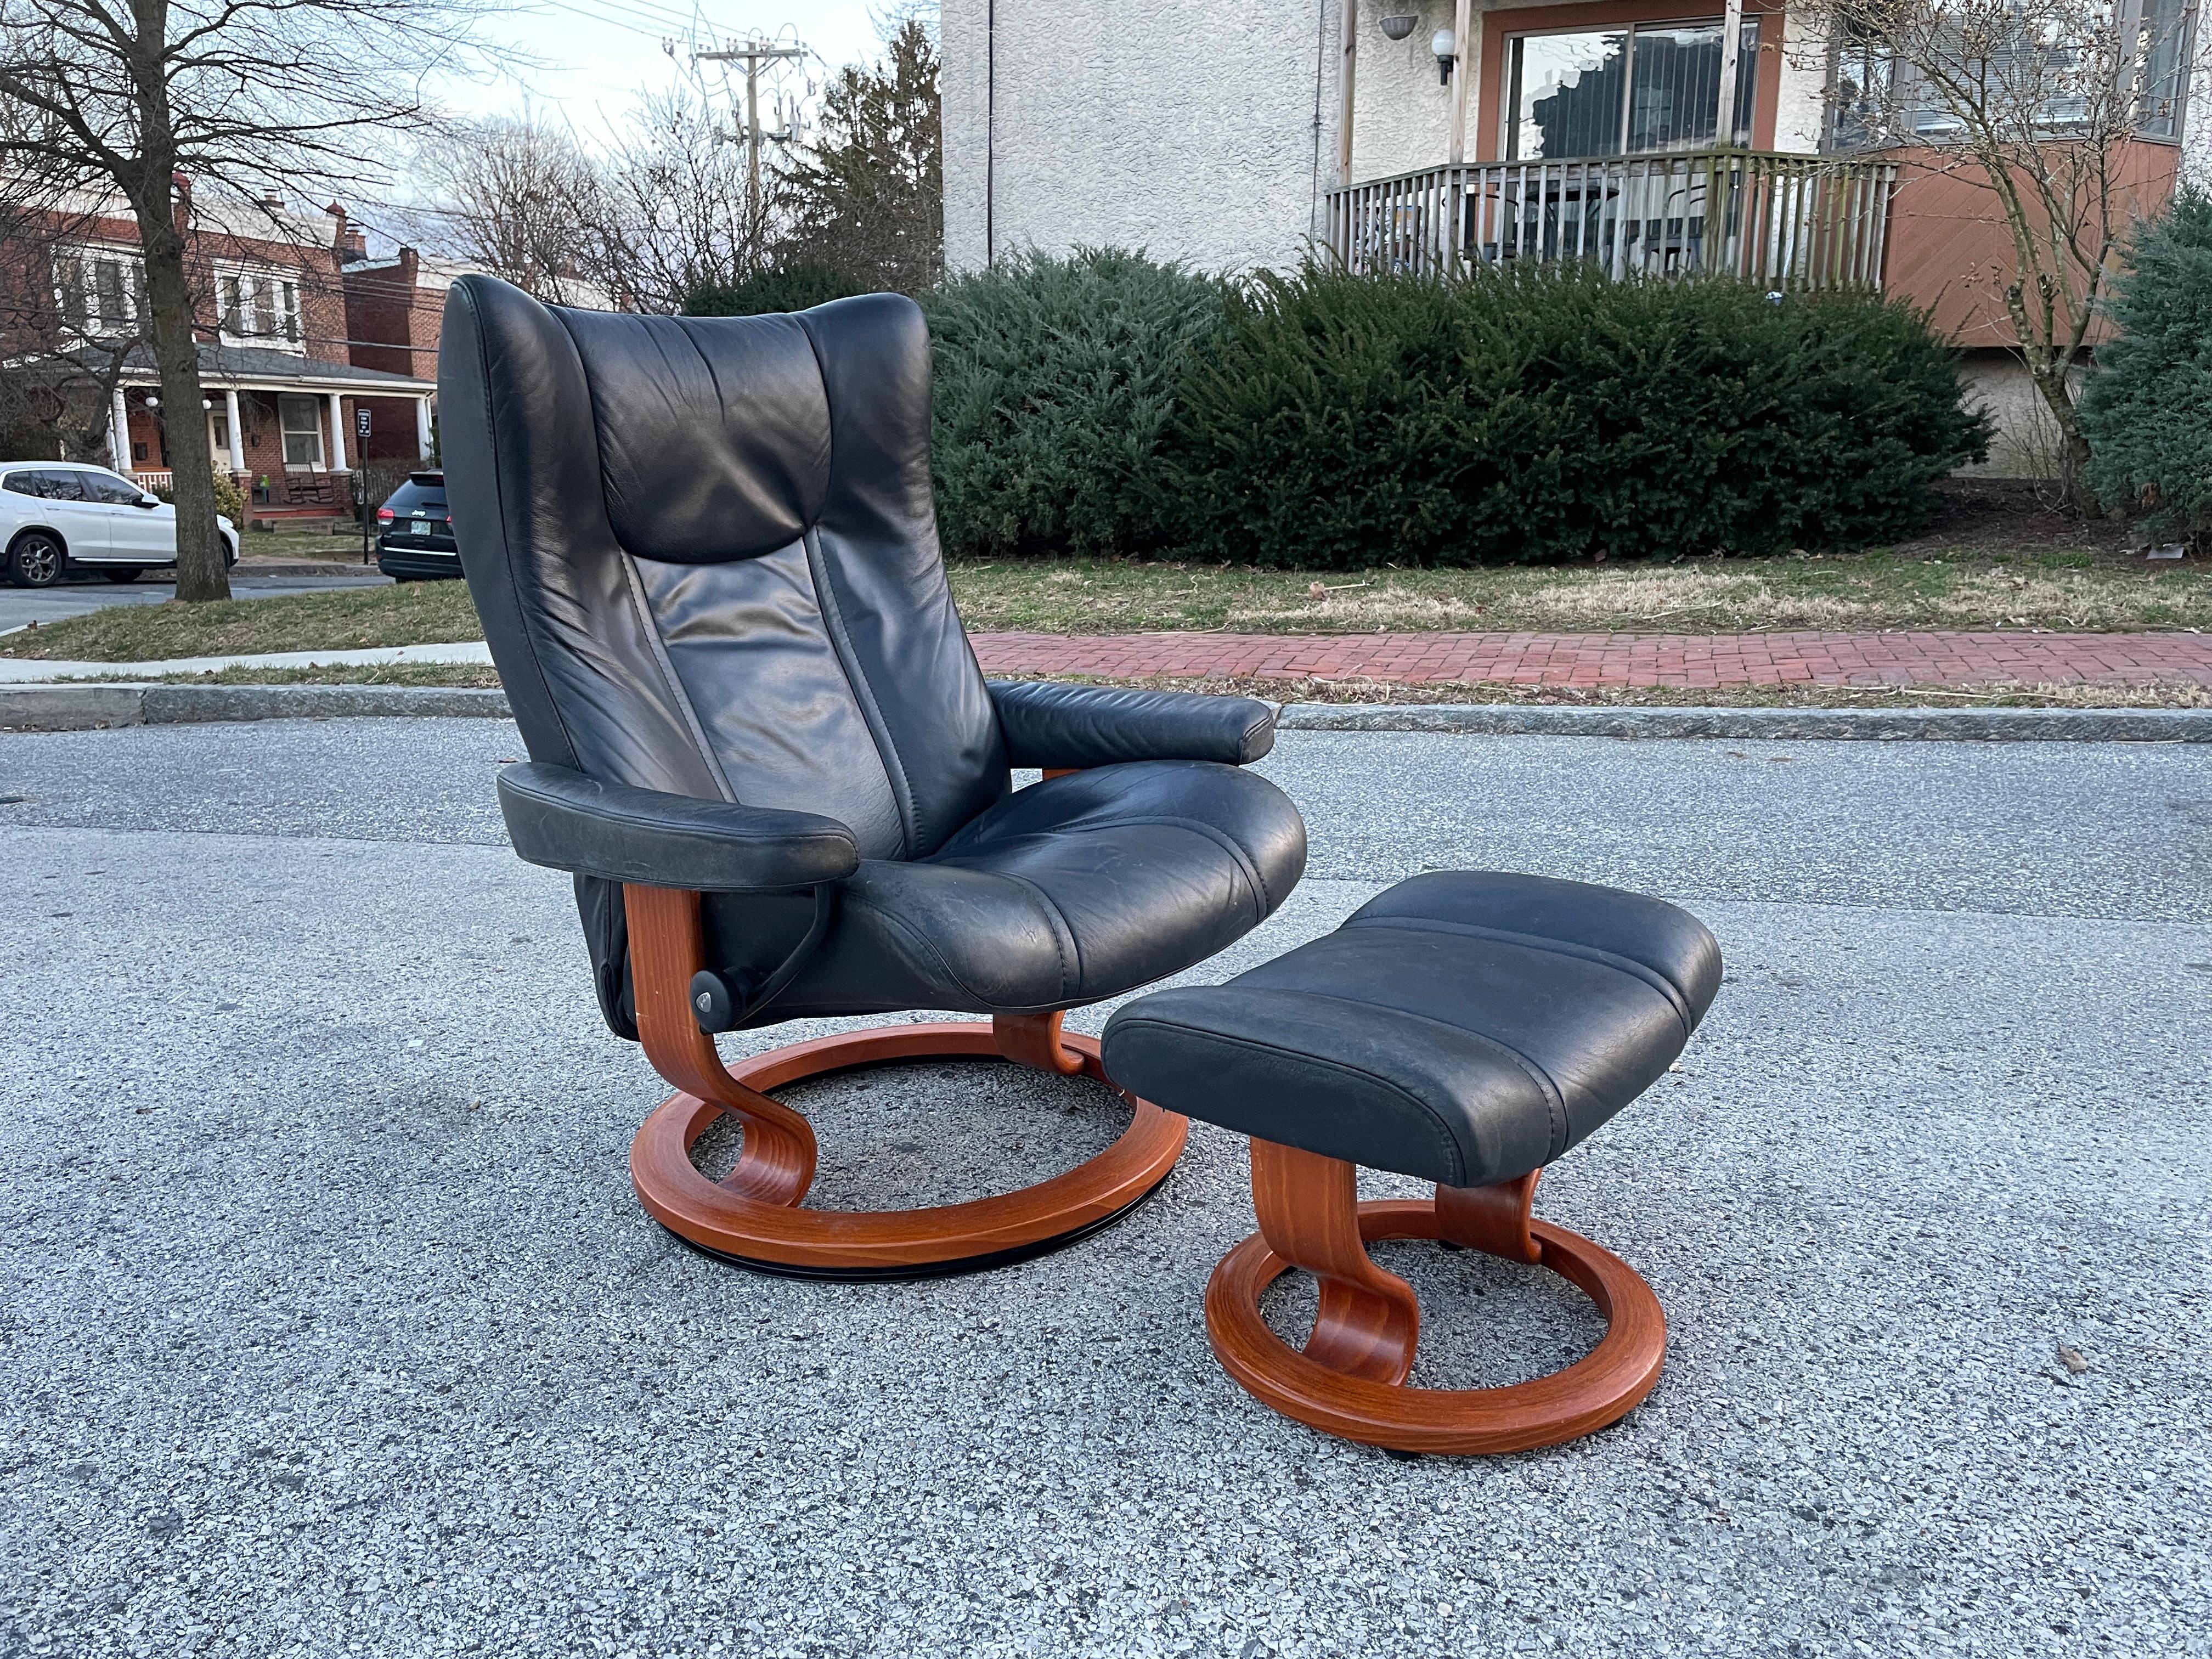 A beautiful Ekornes stressless black leather recliner lounge chair with matching ottoman. Big and cozy, this is one of Ekornes' most sought-after models. Recliner locks work well. No rips or serious scratches.

The chair measures 33” wide x 29”